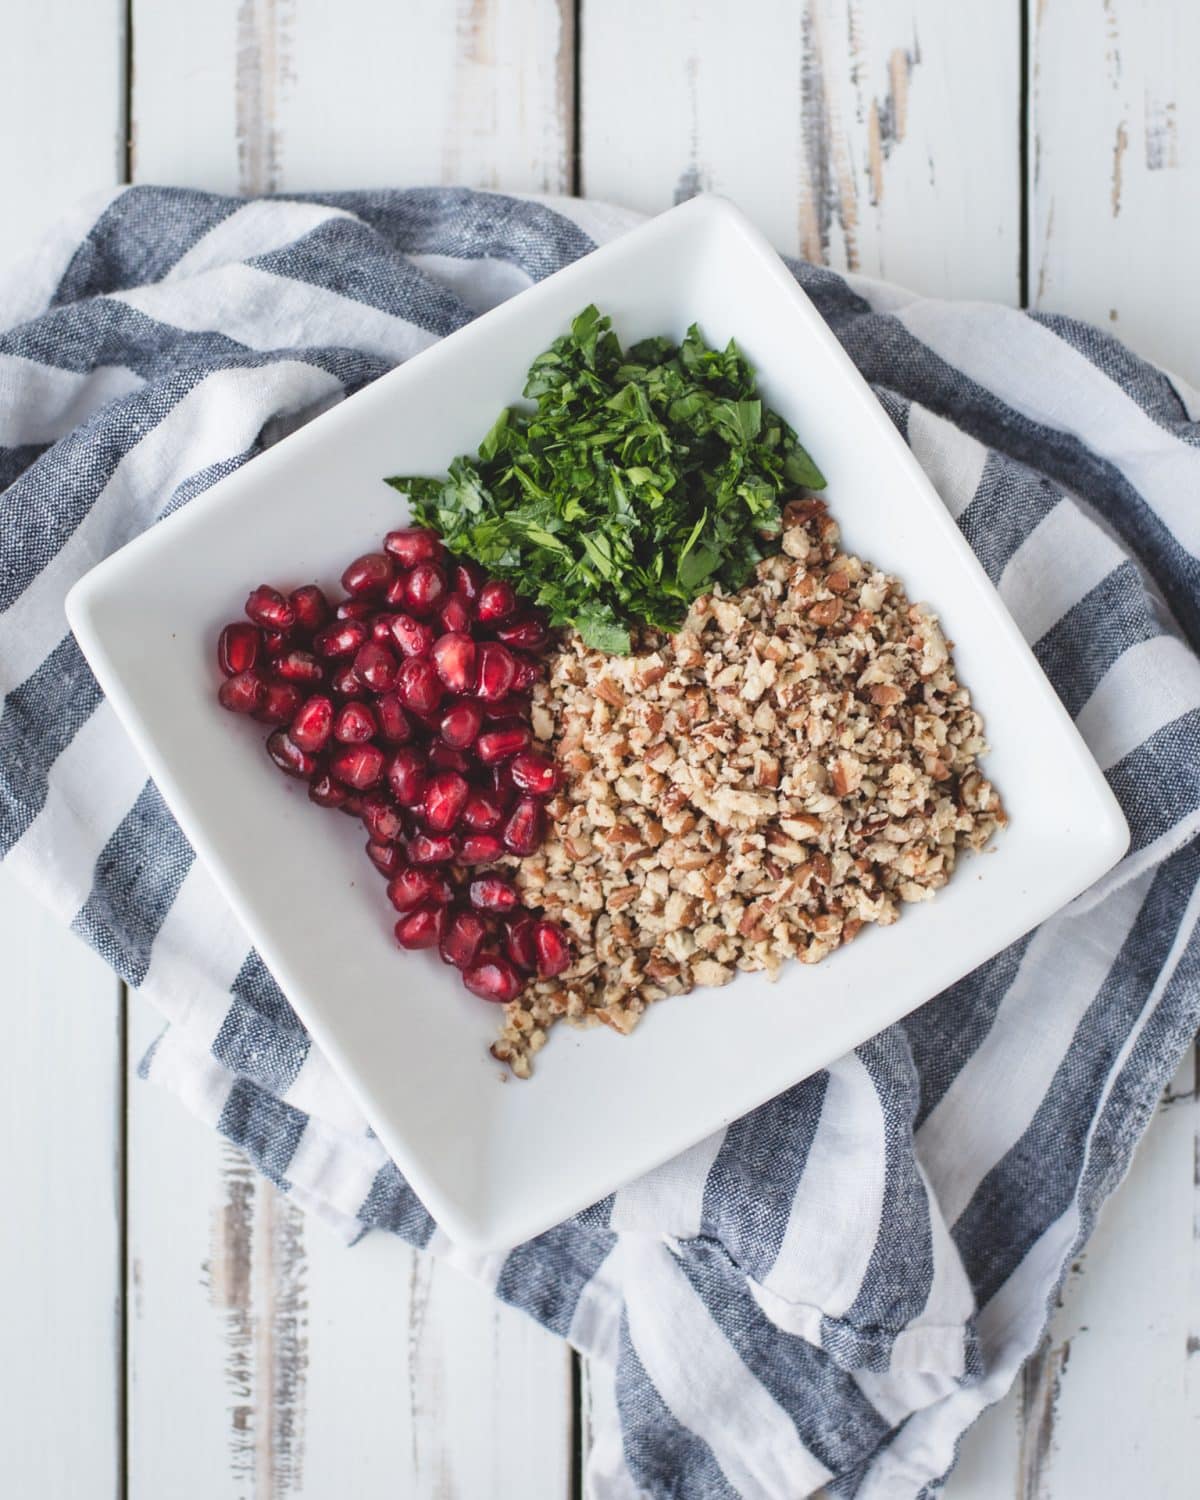 pomegranate, parsley, and crushed pecans in a white bowl